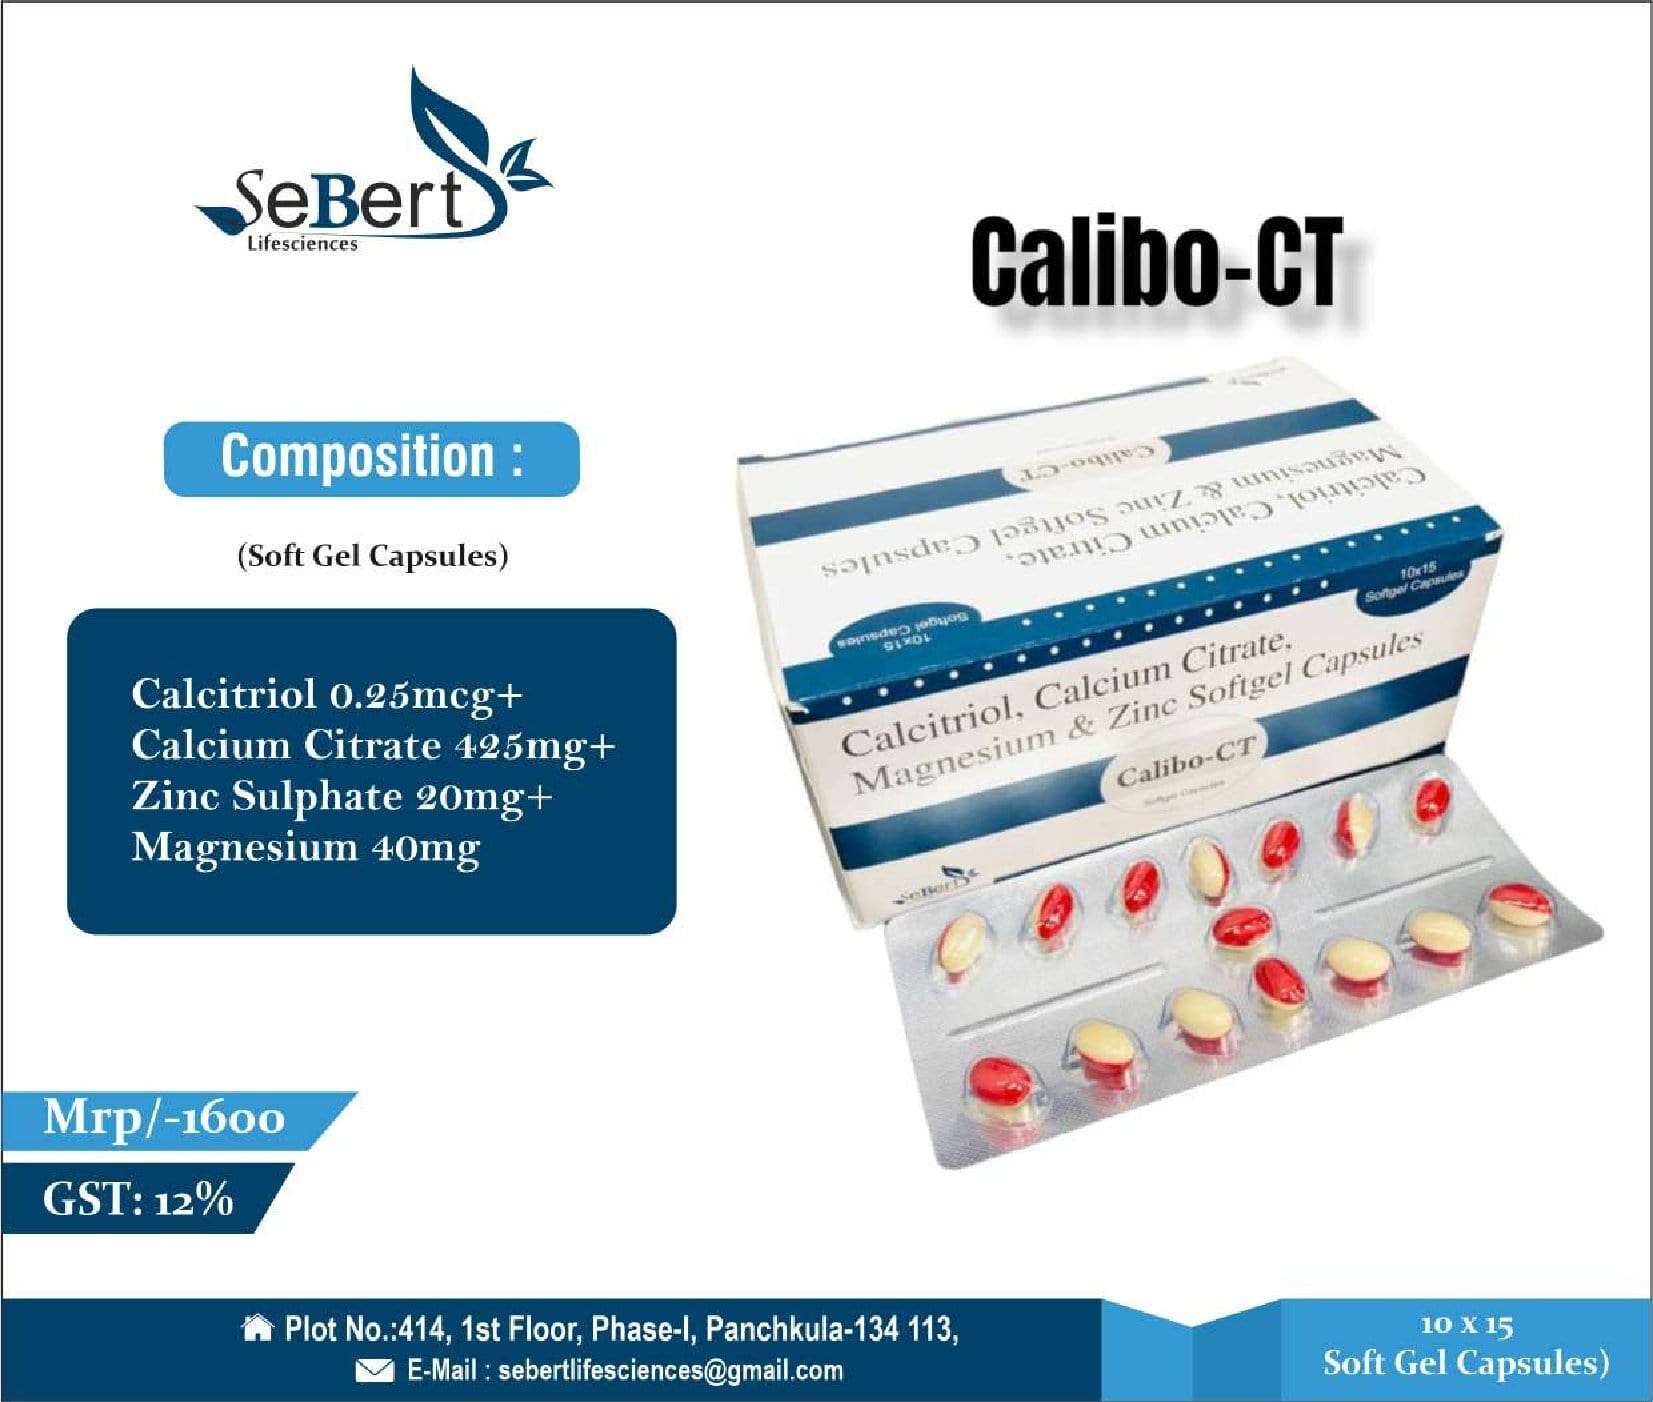 calcitriol 0.25mcg + calcium citrate 425mg + zinc sulphate monohydrate 20mg + magnesium oxide 40mg